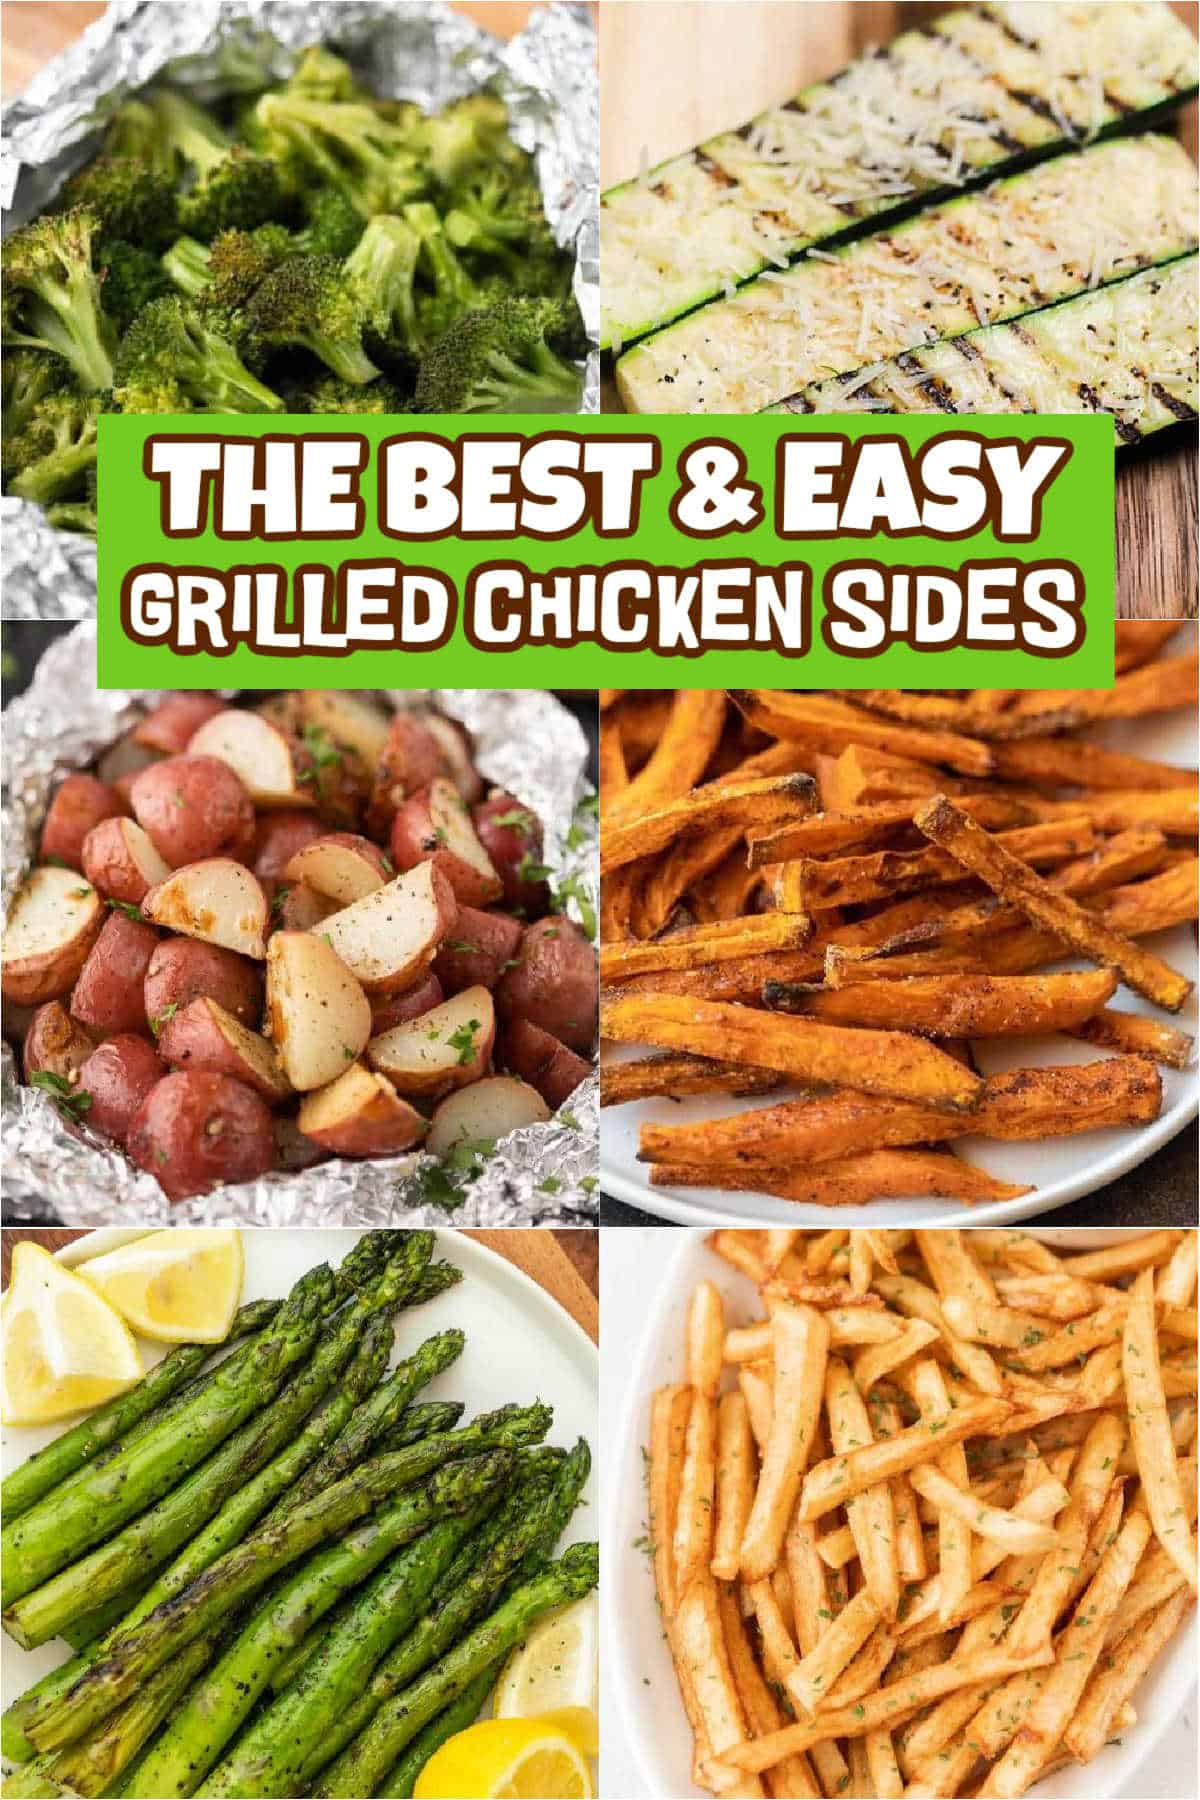 32 grilled chicken sides that will make dinner time easy. These side dishes for grilled chicken are packed with flavor and effortless to prepare. Just about anything goes with grilled chicken but I try to keep it simple. Some of our favorites include a baked sweet potato, potato wedges, mashed potatoes, corn on the cob or French fries. #eatingonadime #grilledchickensides #sidedishrecipes